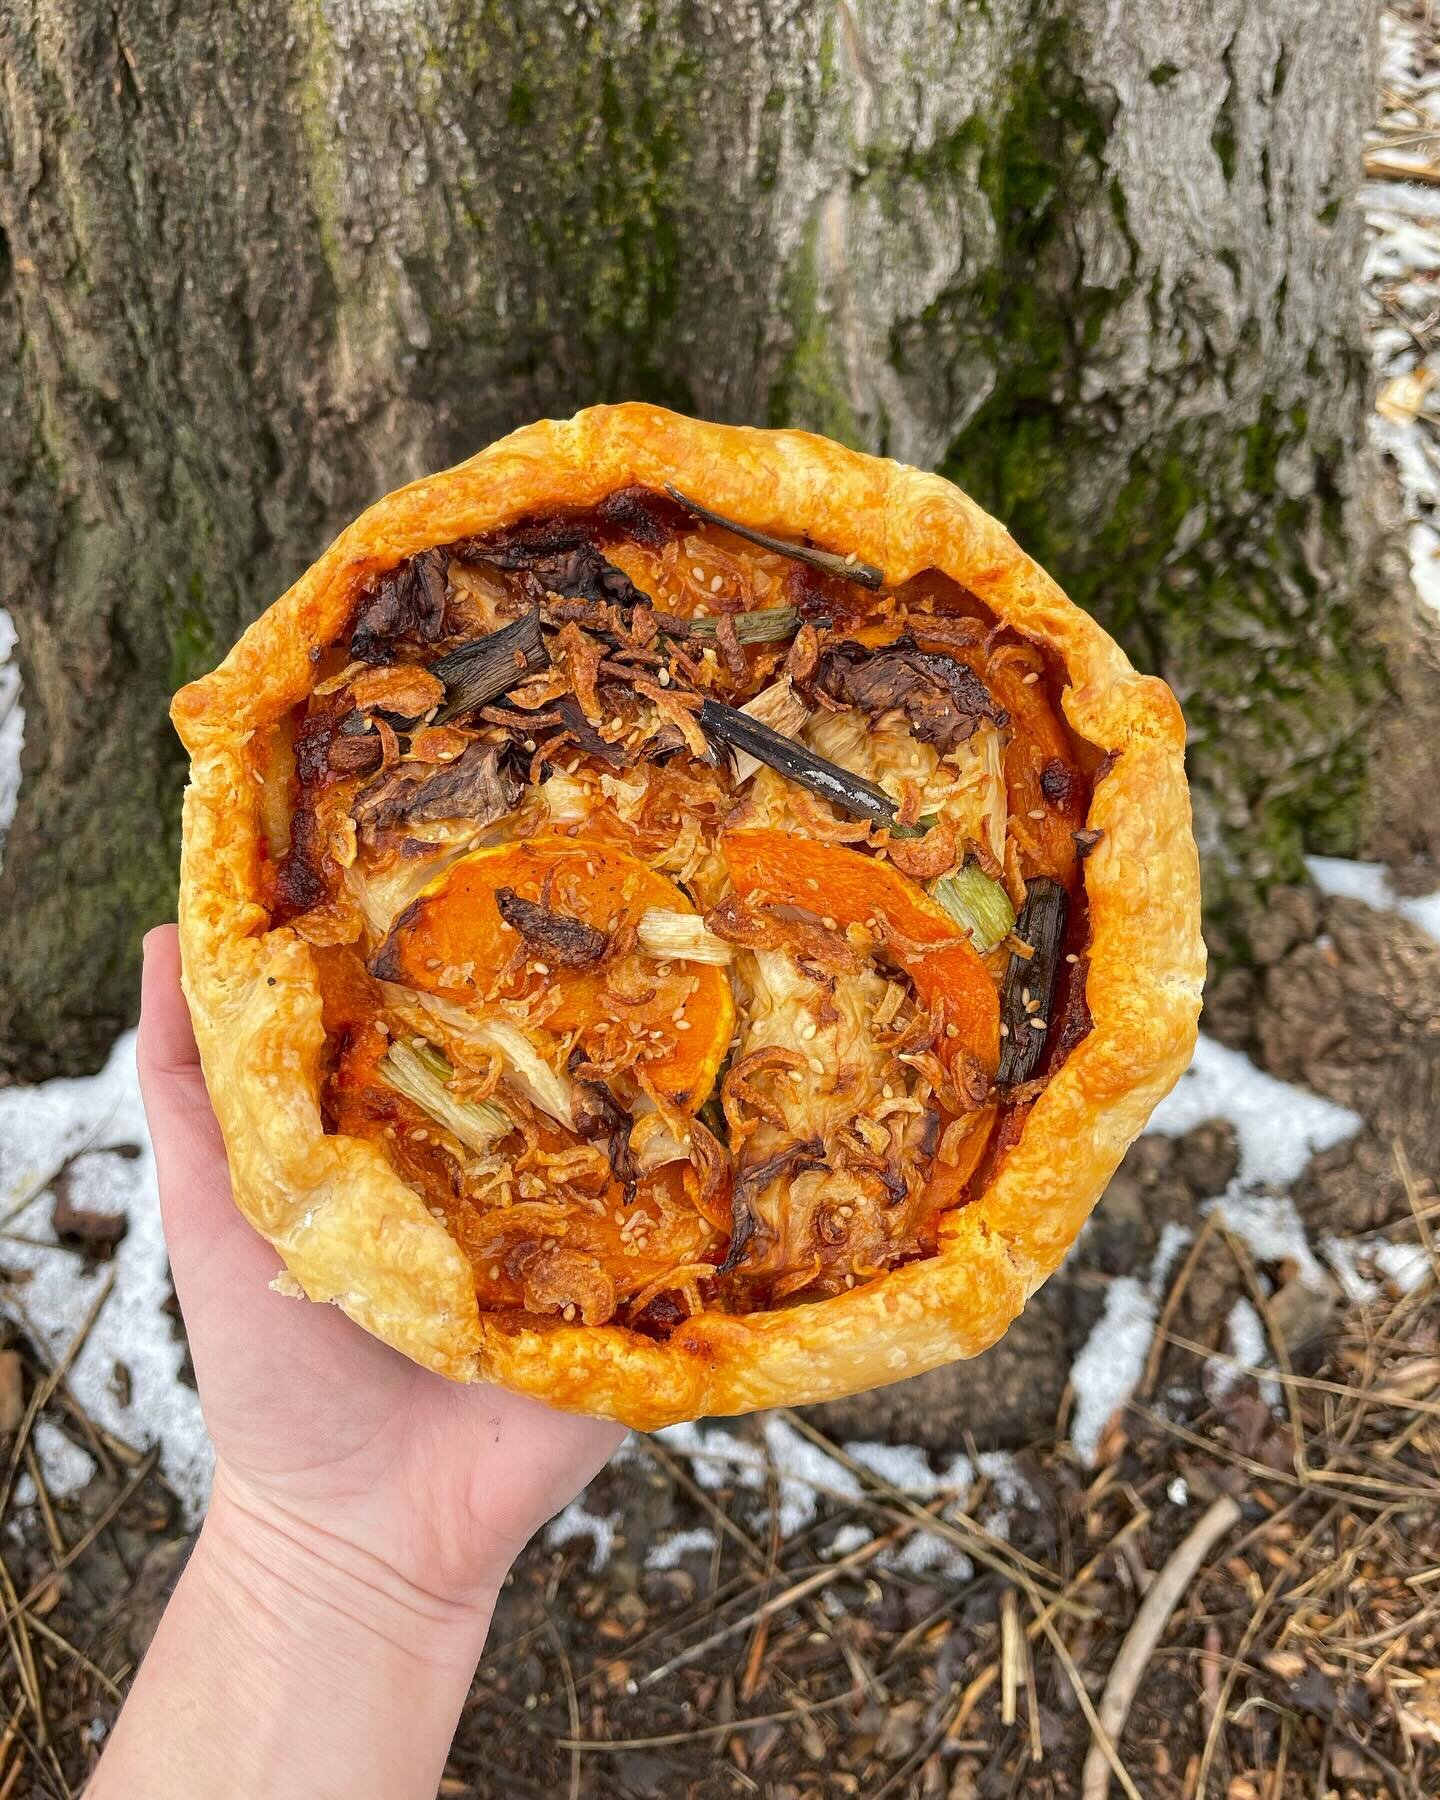 New Winter Veg Tart in the pastry case this Saturday @slcfarmersmarket 
Gochujang mayo, butternut squash, cabbage, green onion, crispy onions, sesame seeds.
We&rsquo;re at the market every Saturday from 10am -2pm at the gateway mall so come on down! 